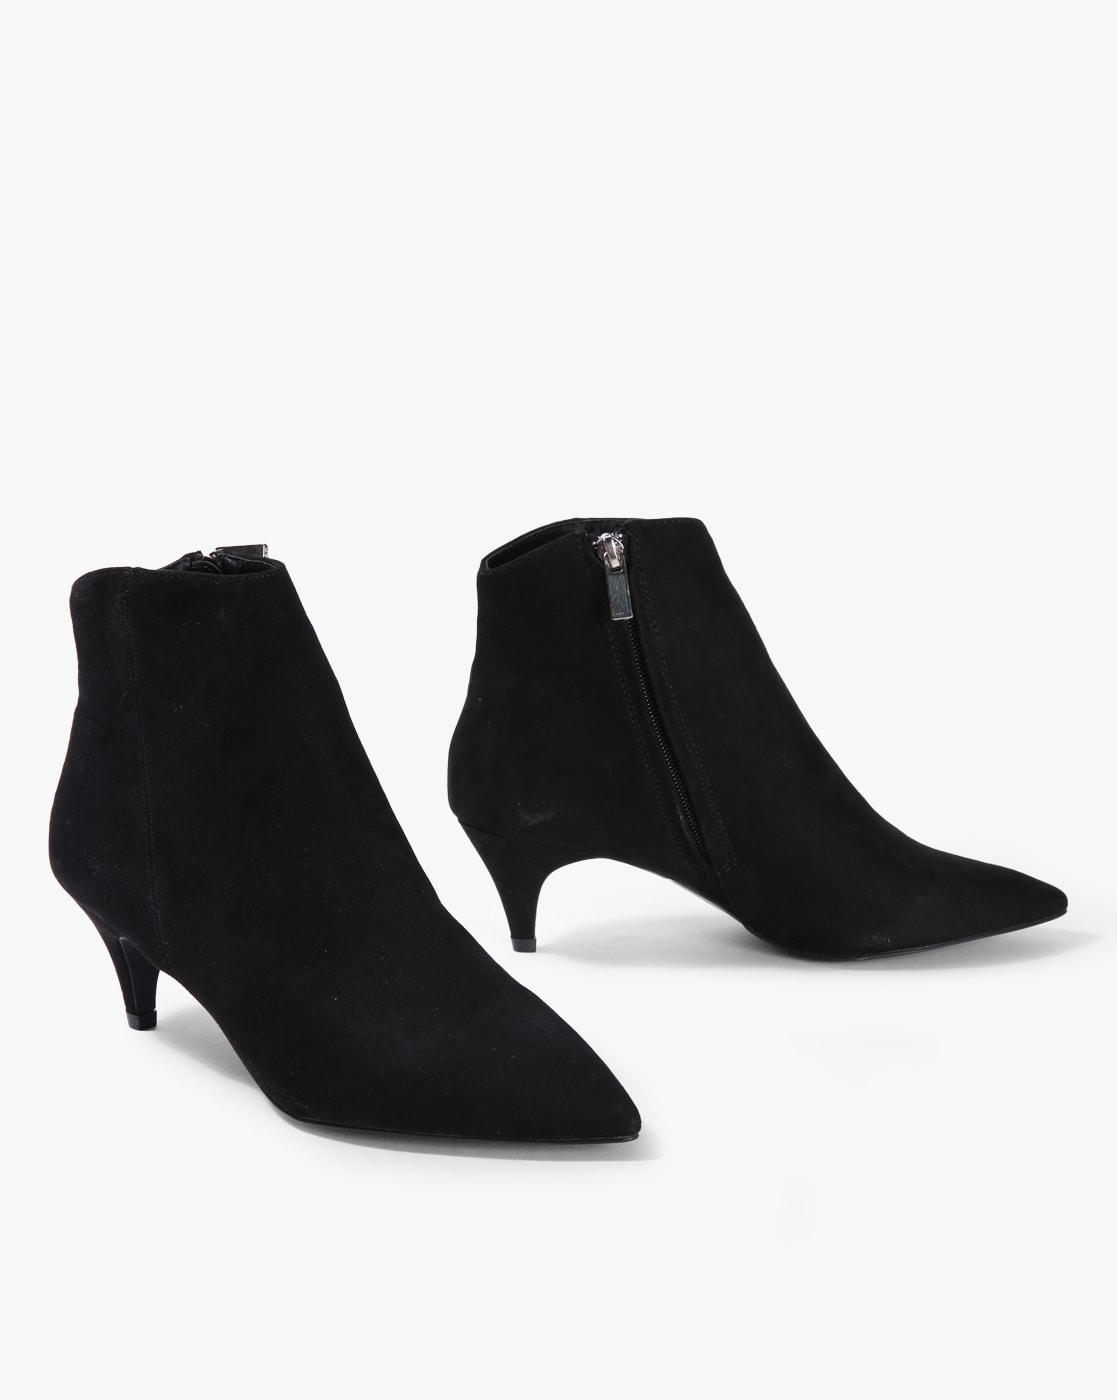 Buy Black Boots for Women by QUPID 